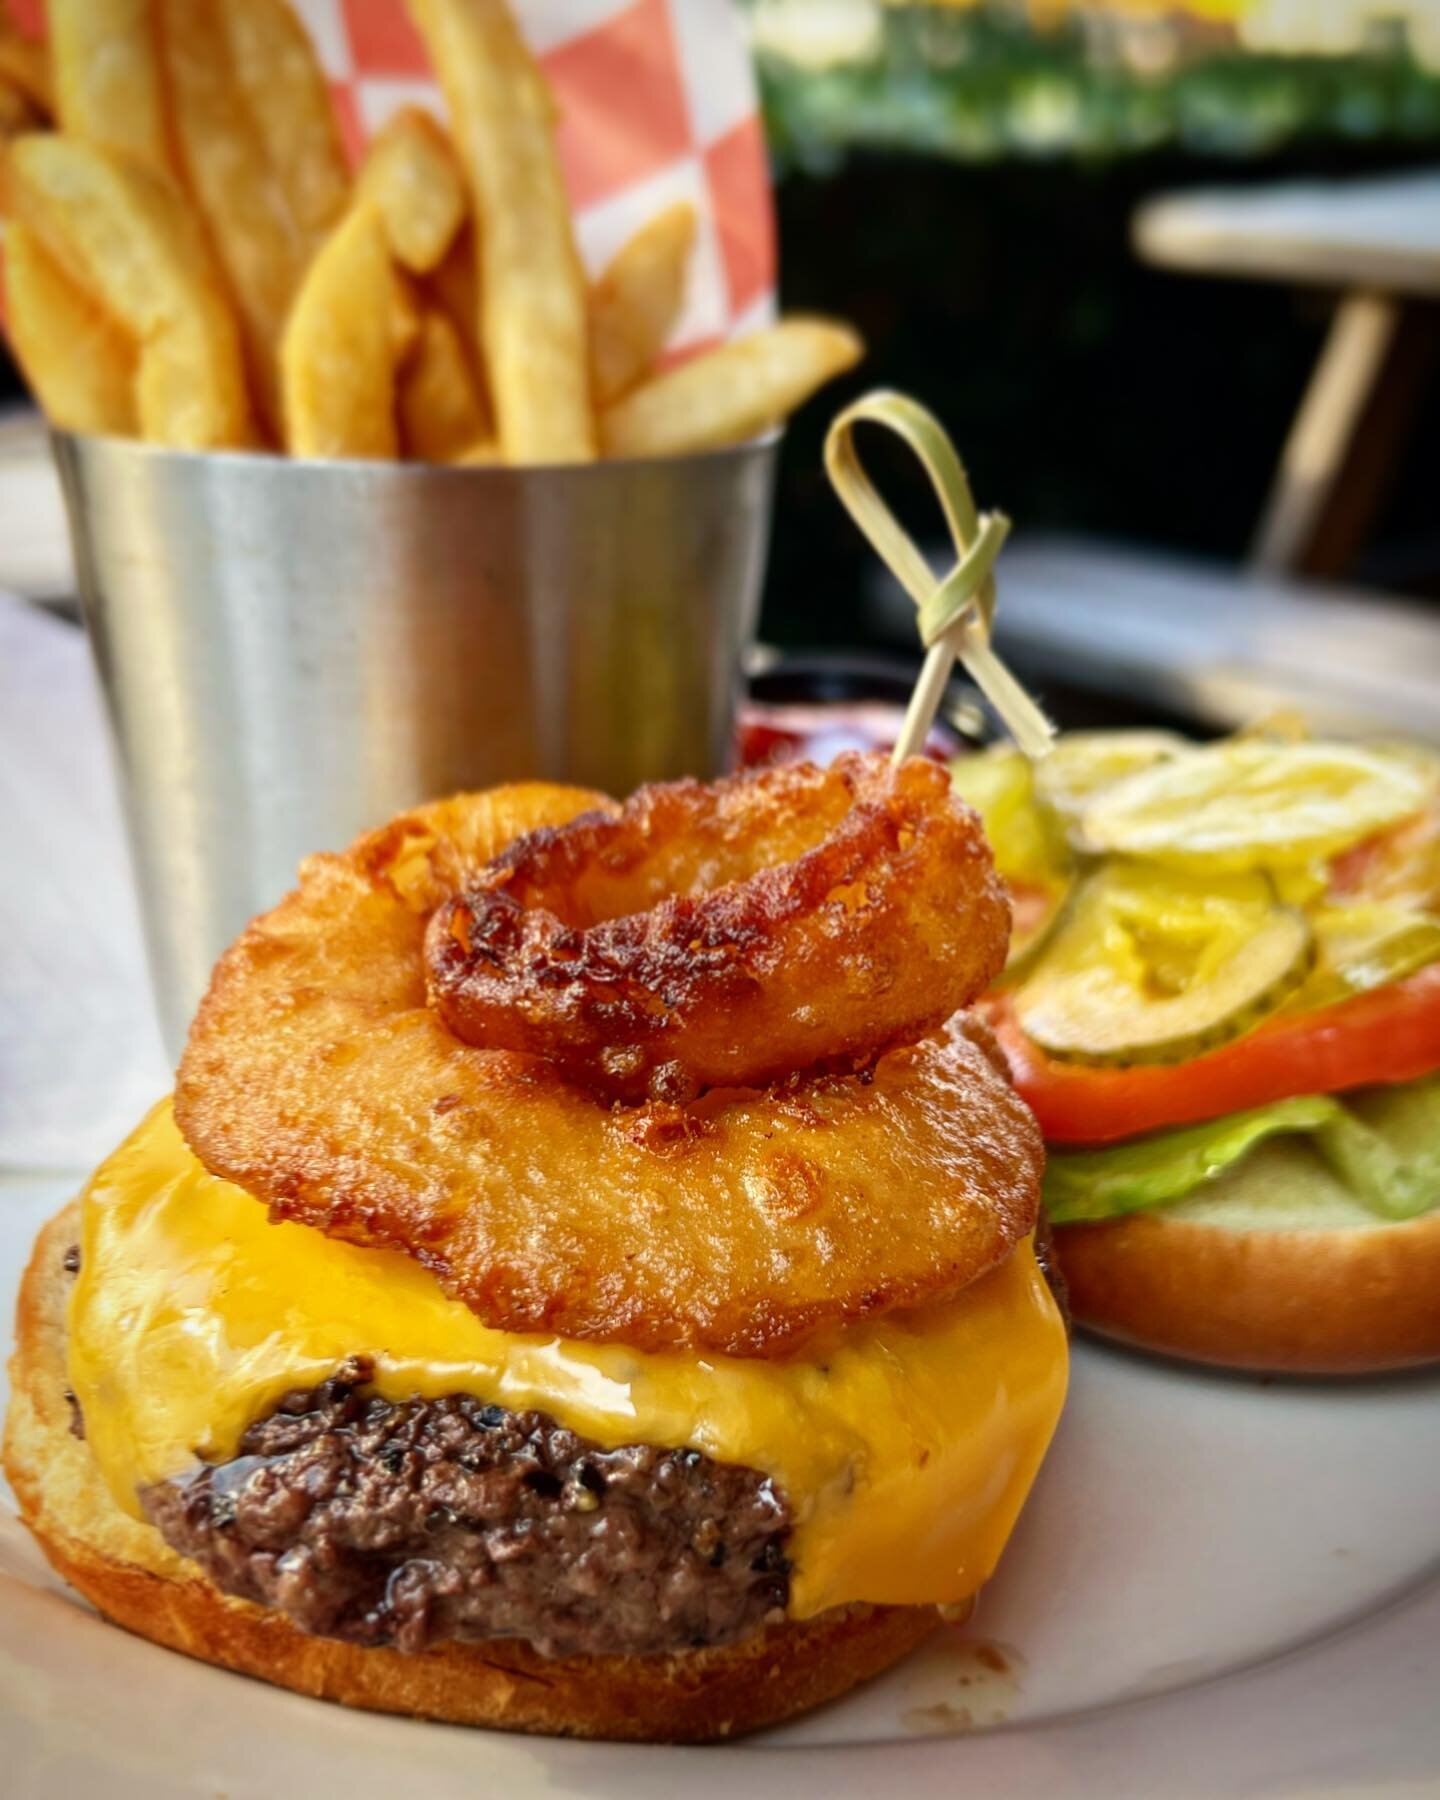 In case you needed MORE motivation to visit us!! It&rsquo;s always a good day for a great burger. Always. See you soon!! 🍺🍔🌇
.
.
.
.
.
.
#thehideawayseaport #cheeseburger #cheeseburgerinparadise #fidibar #fidirestaurant #nyc #nyceeeats #eeeats #yu